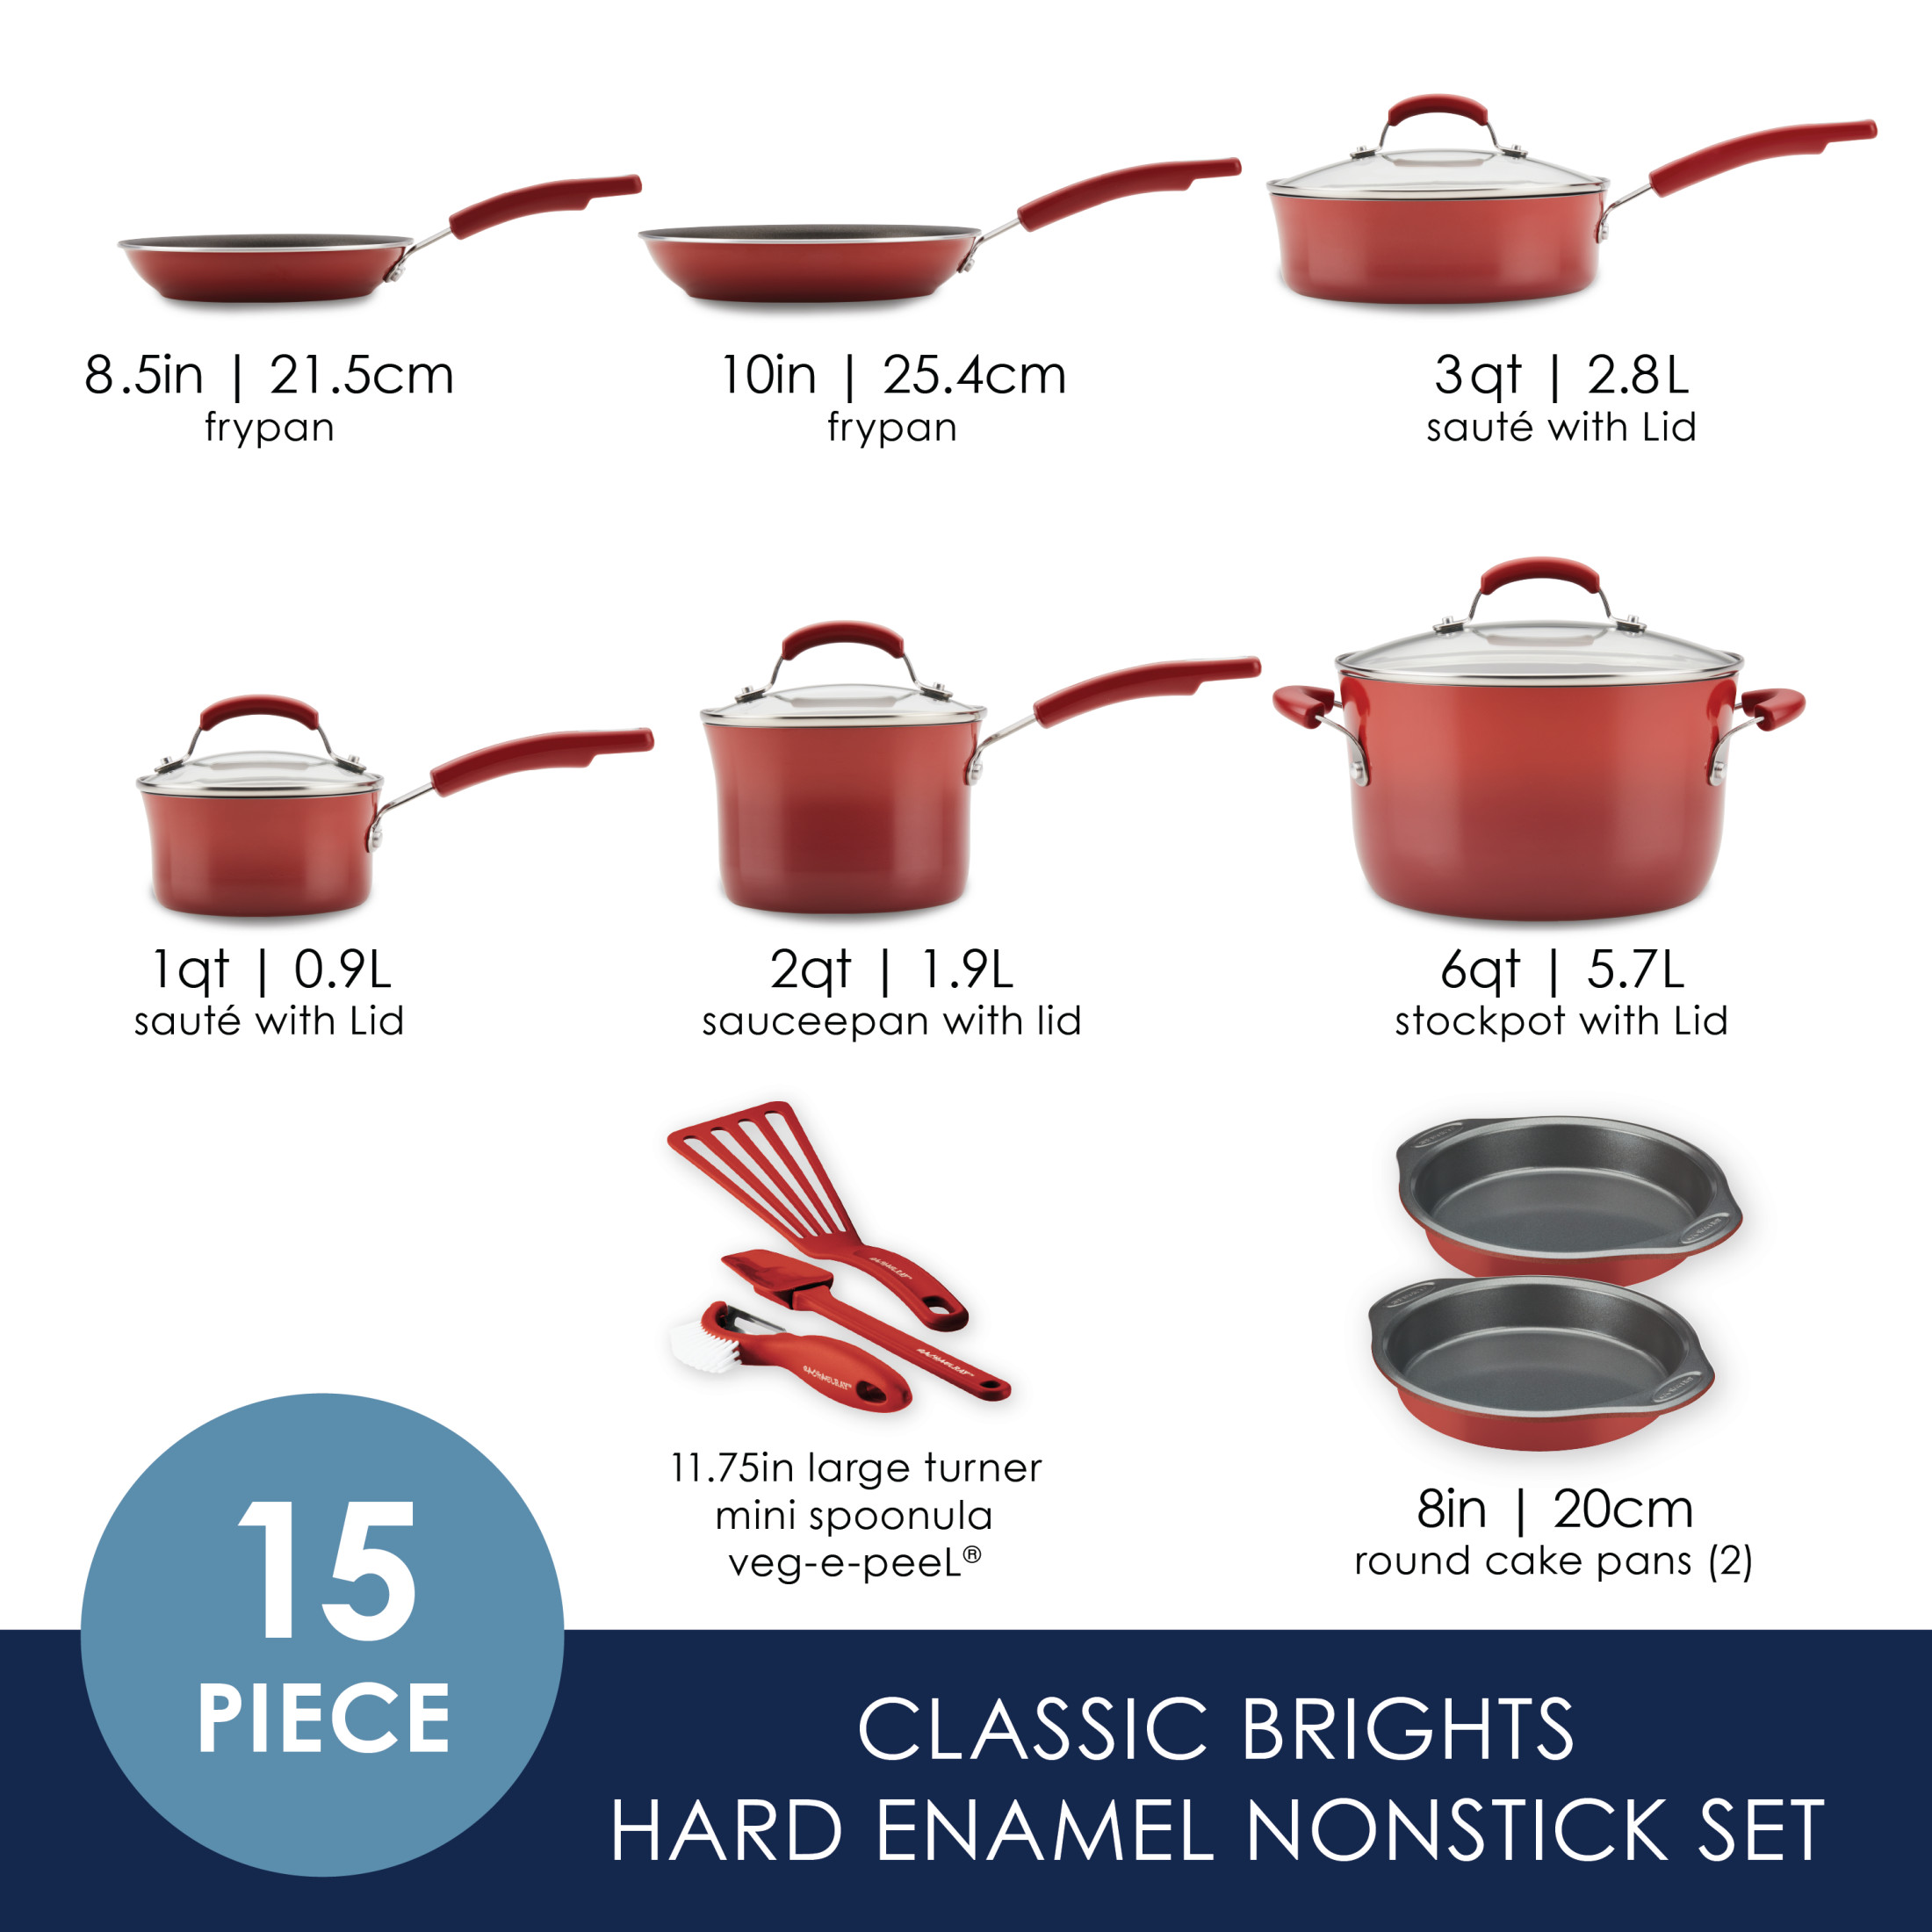 Rachael Ray Classic Brights 15 Piece Nonstick Pots and Pans, Red Gradient - image 3 of 17